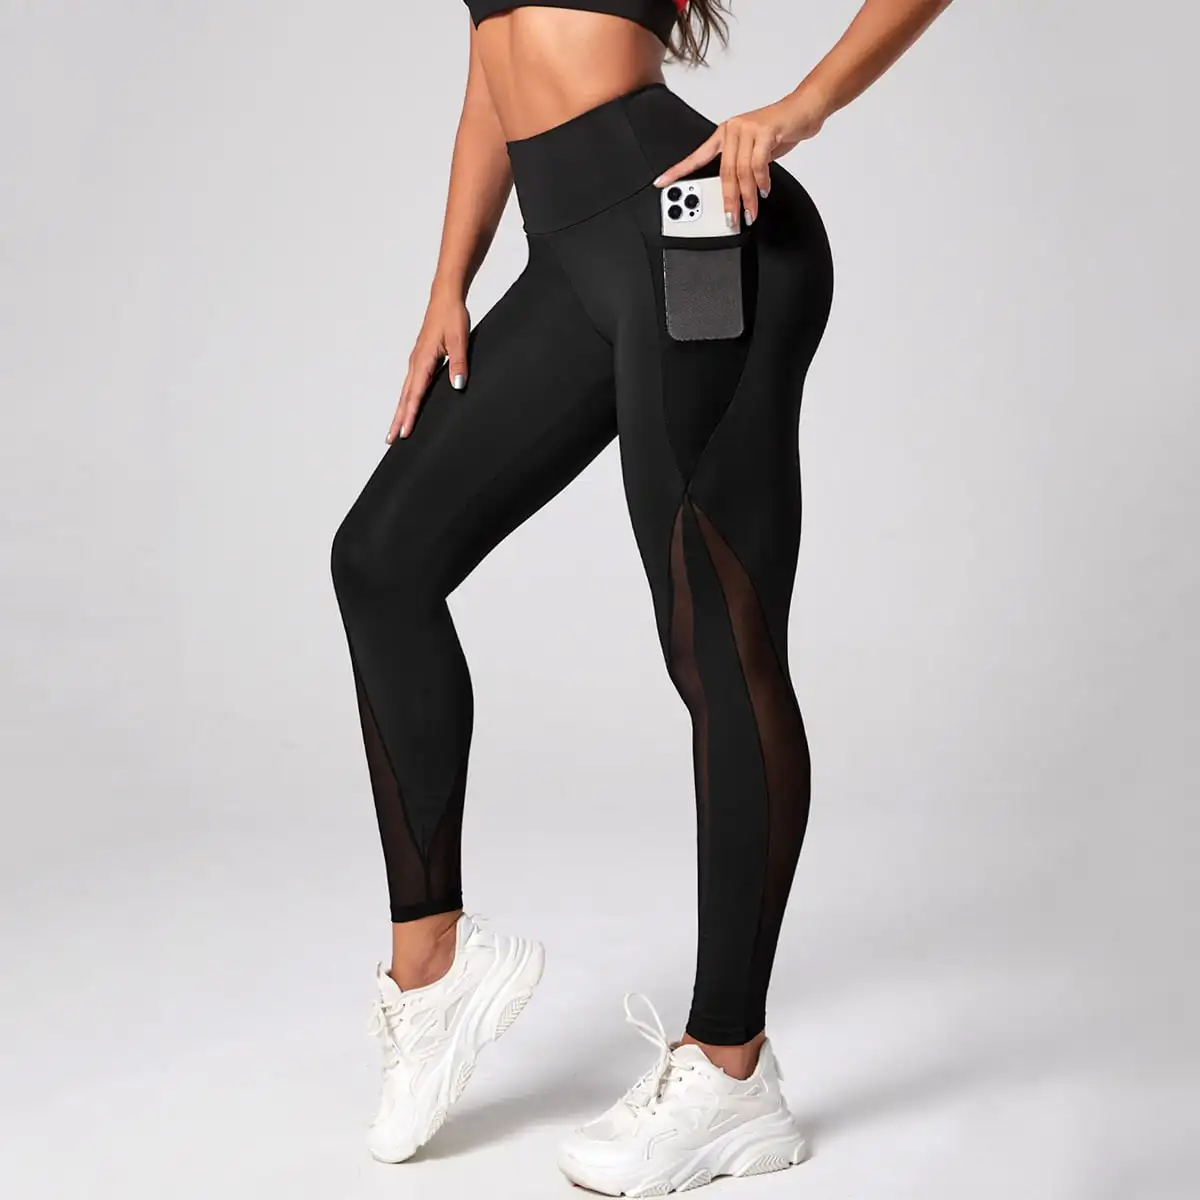 Hot selling Sexy mesh unique style Tummy Control high waist Women Black Slim Fitness push up Leggings with side pocket